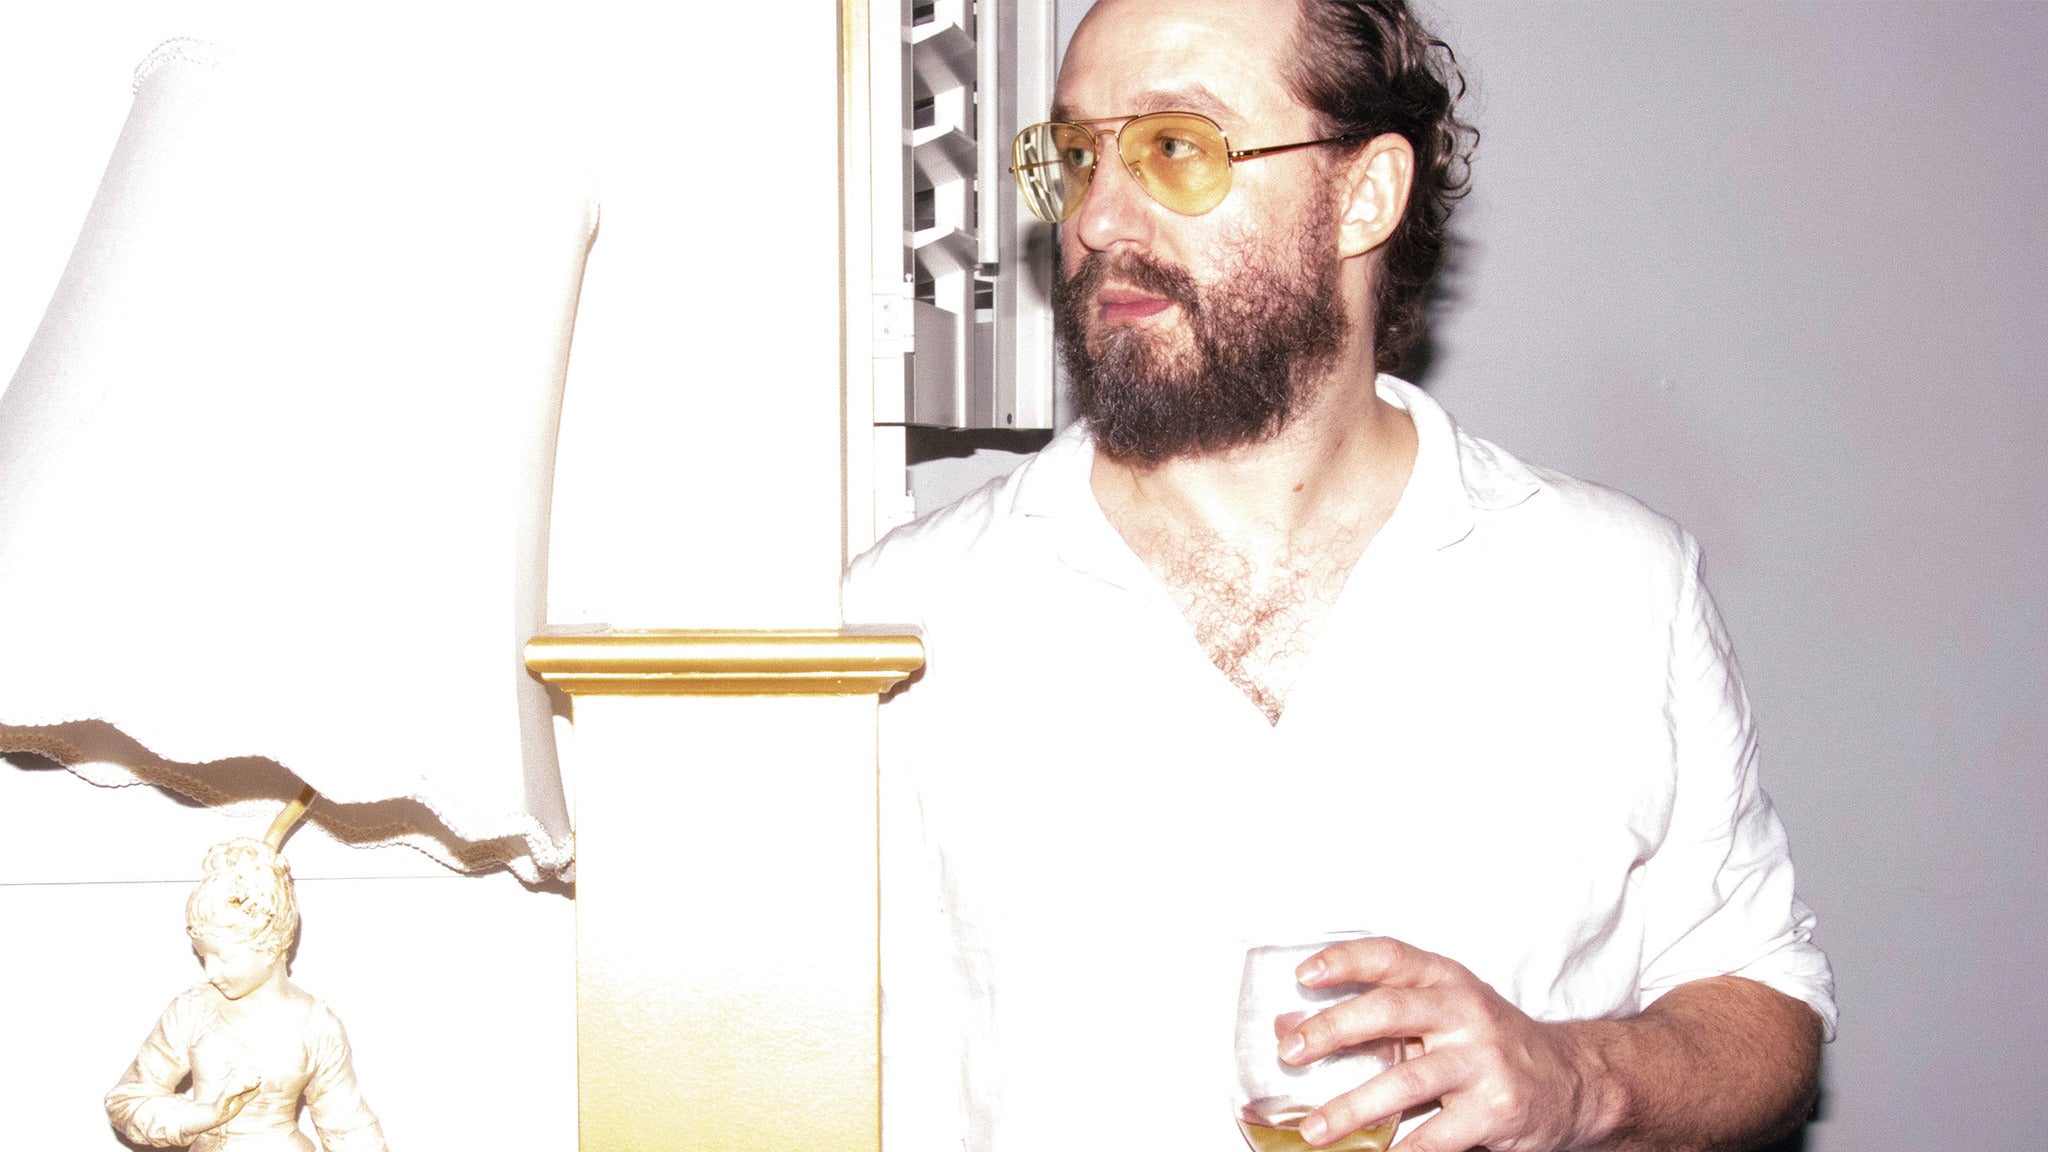 88.5 FM Presents Phosphorescent in Los Angeles promo photo for Spotify presale offer code